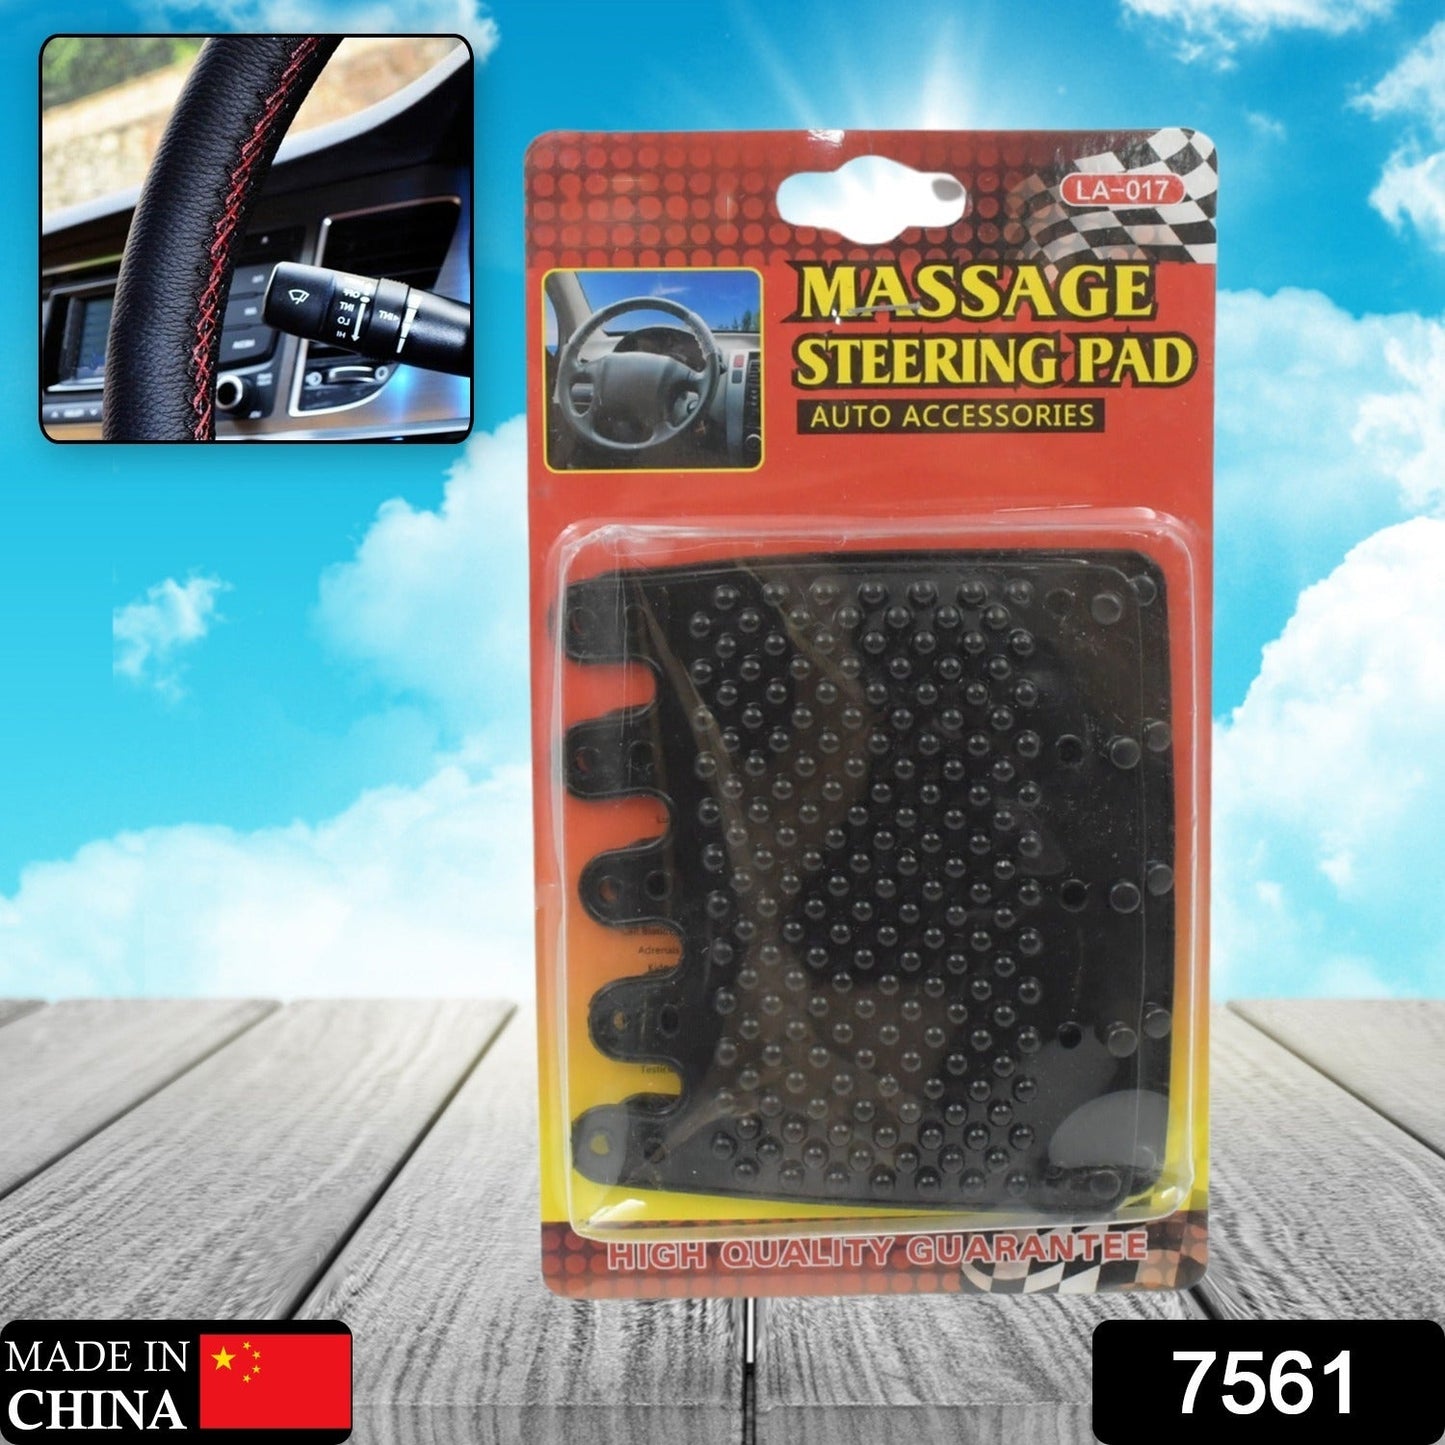 Silicon Car Massage Steering Cover High Quality Silicon Massger Pad Suitable For All Car (2 Pc Set) - deal99.in